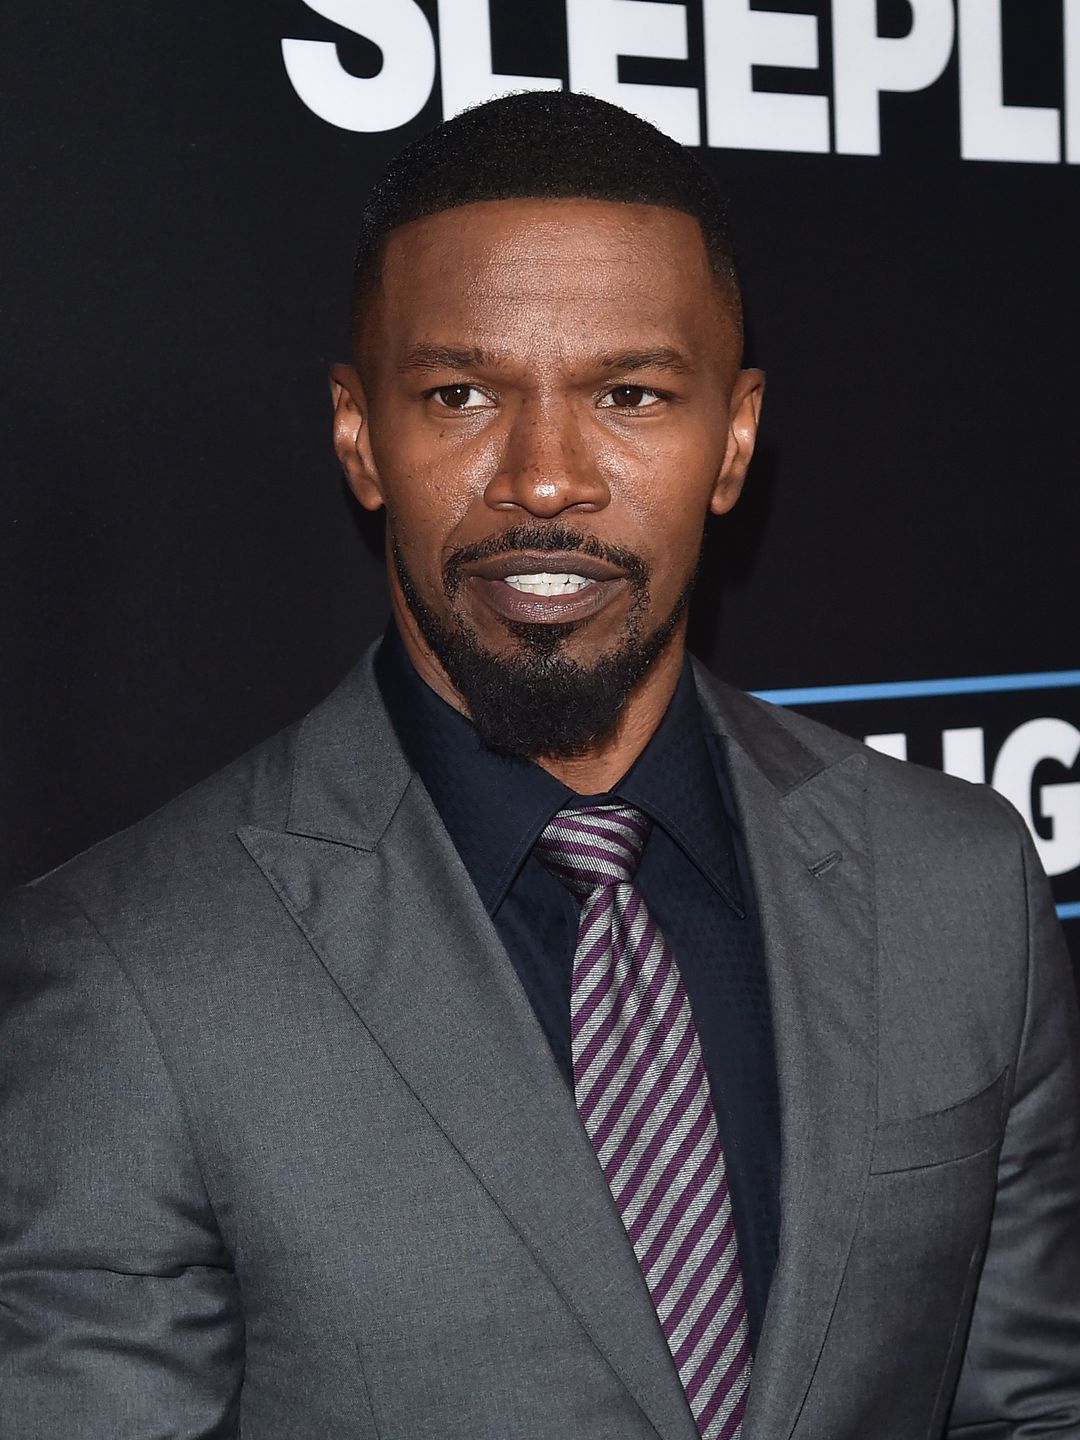 Jamie Foxx who is his father